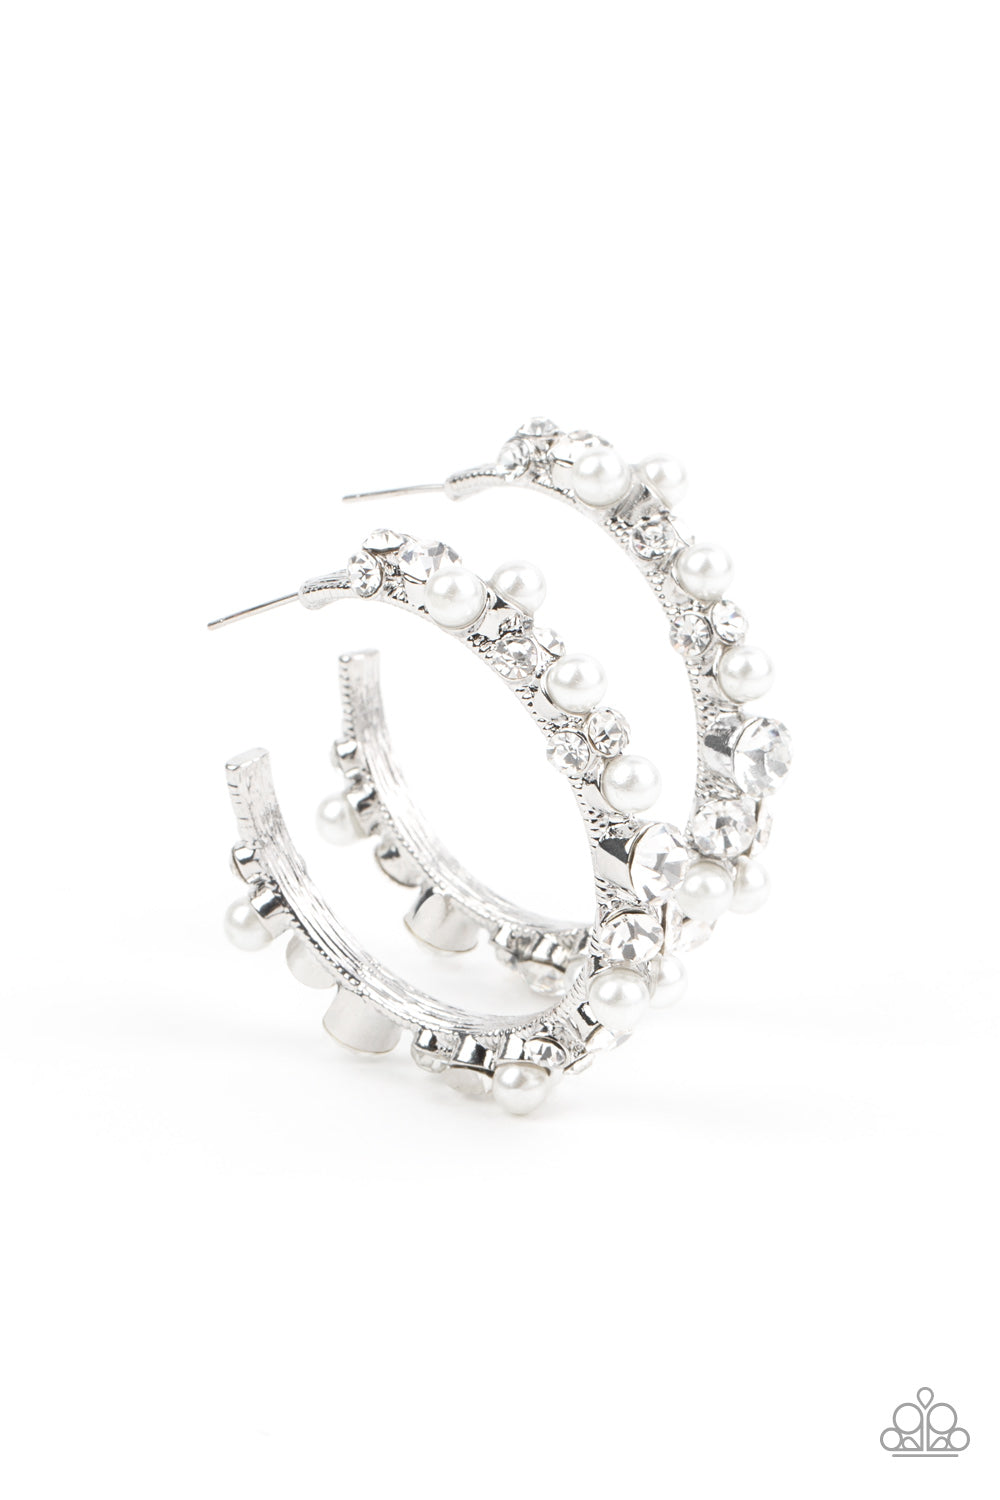 Paparazzi Let There Be SOCIALITE - White Earrings - A Finishing Touch Jewelry